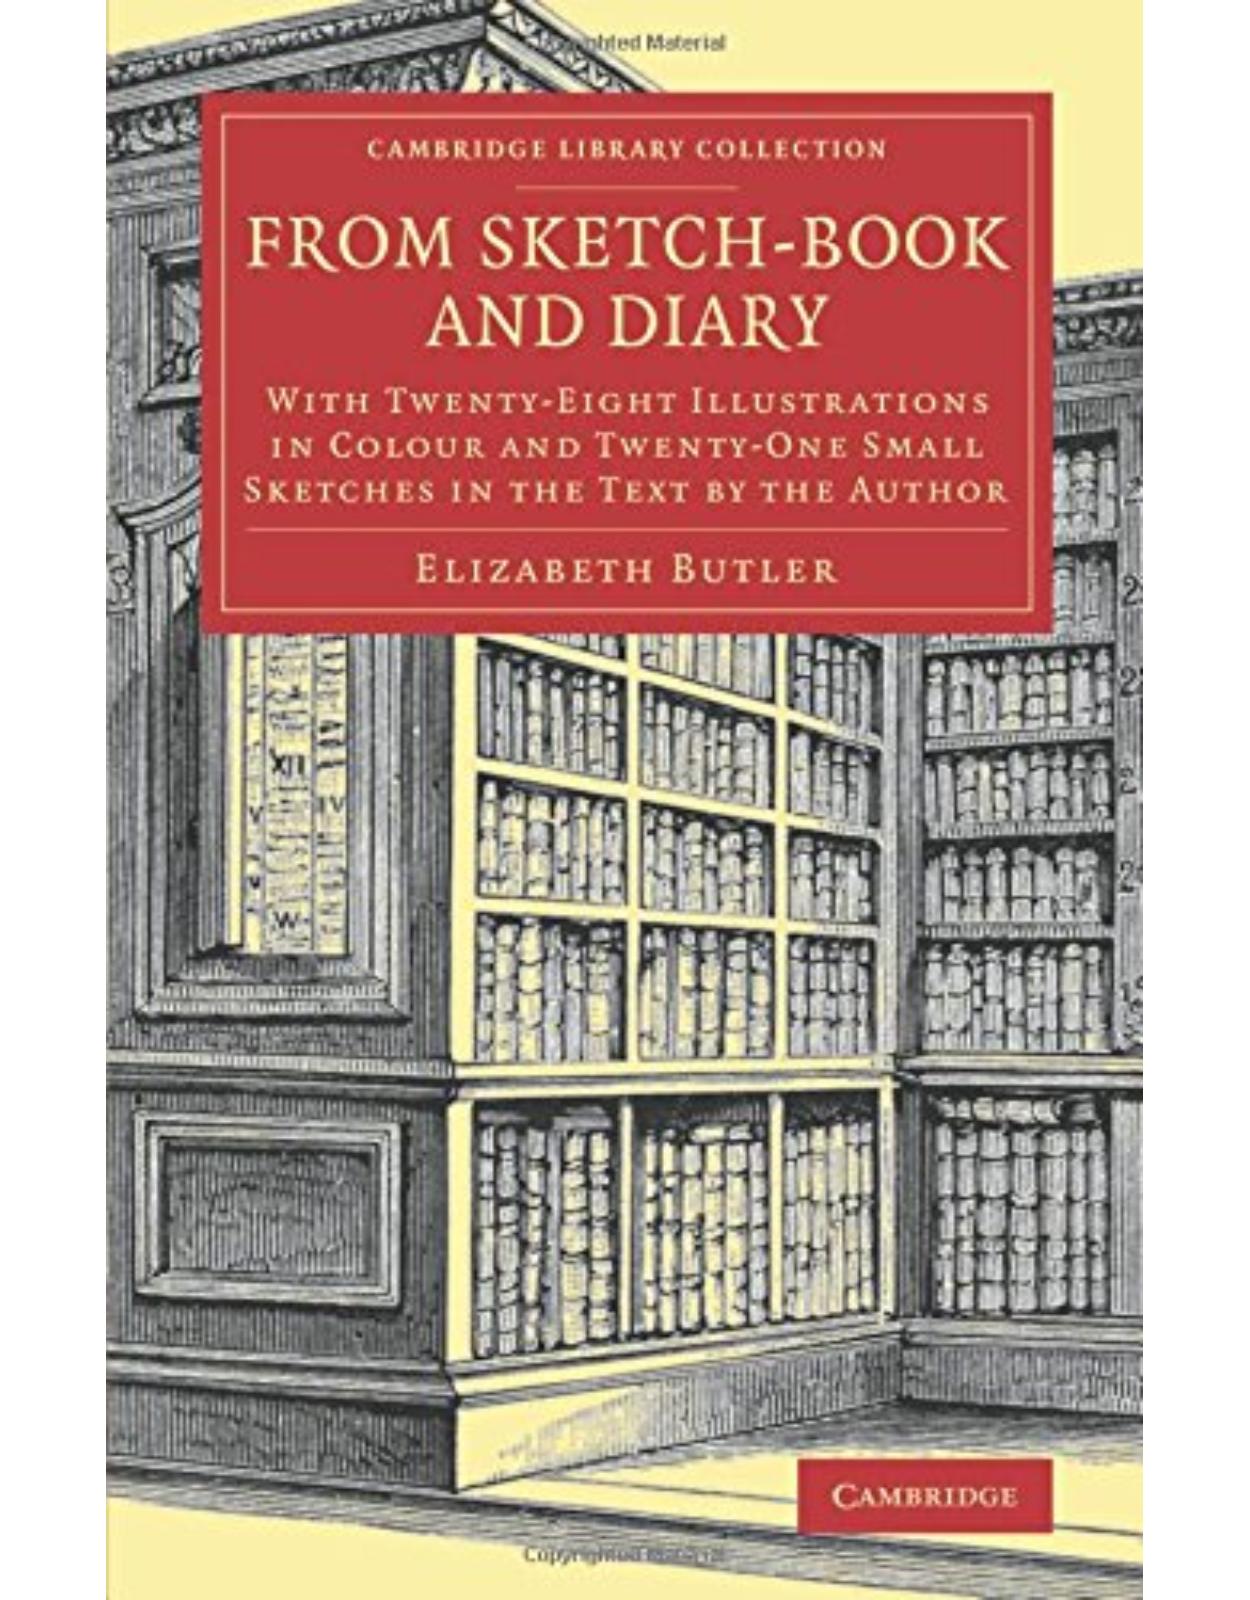 From Sketch-Book and Diary: With Twenty-Eight Illustrations in Colour and Twenty-One Small Sketches in the Text by the Author (Cambridge Library Collection - Art and Architecture)